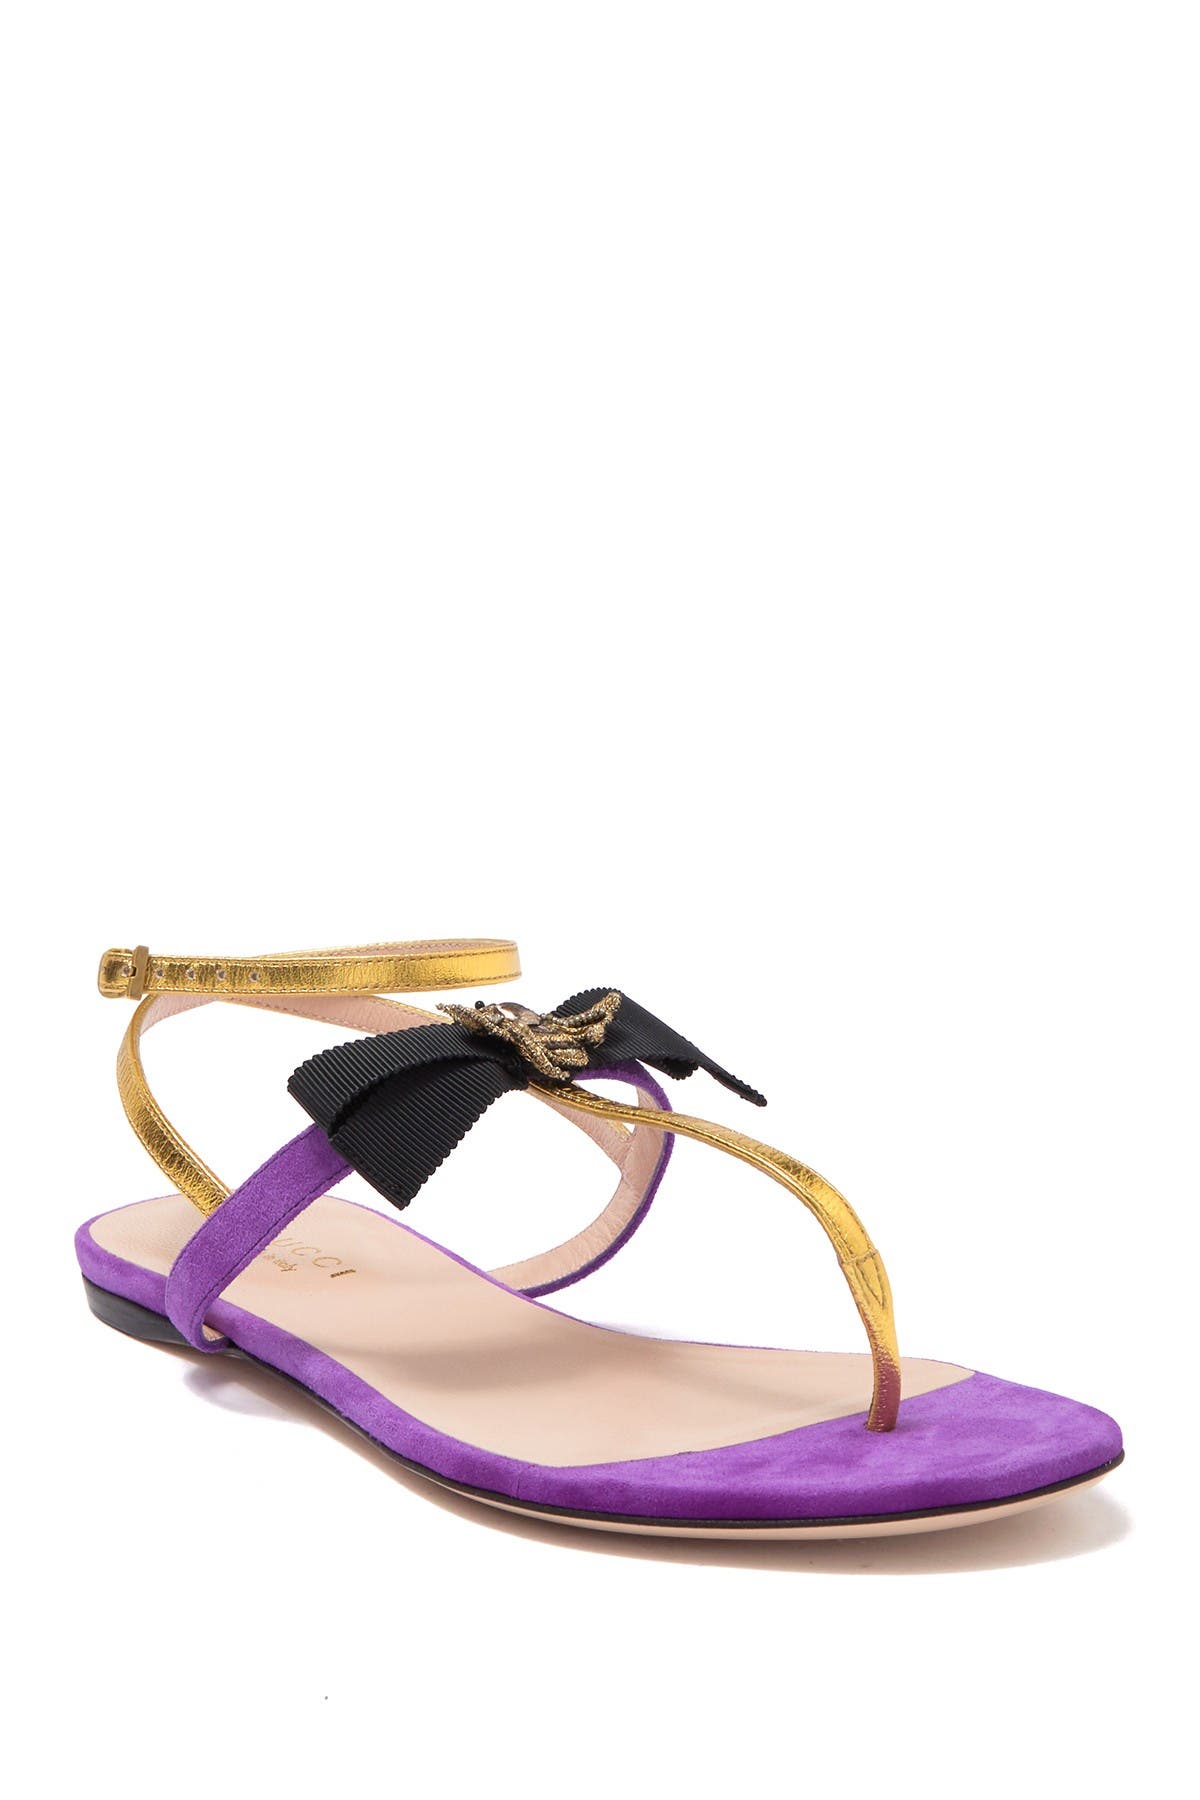 GUCCI | Moody Strappy Bow Sandal 